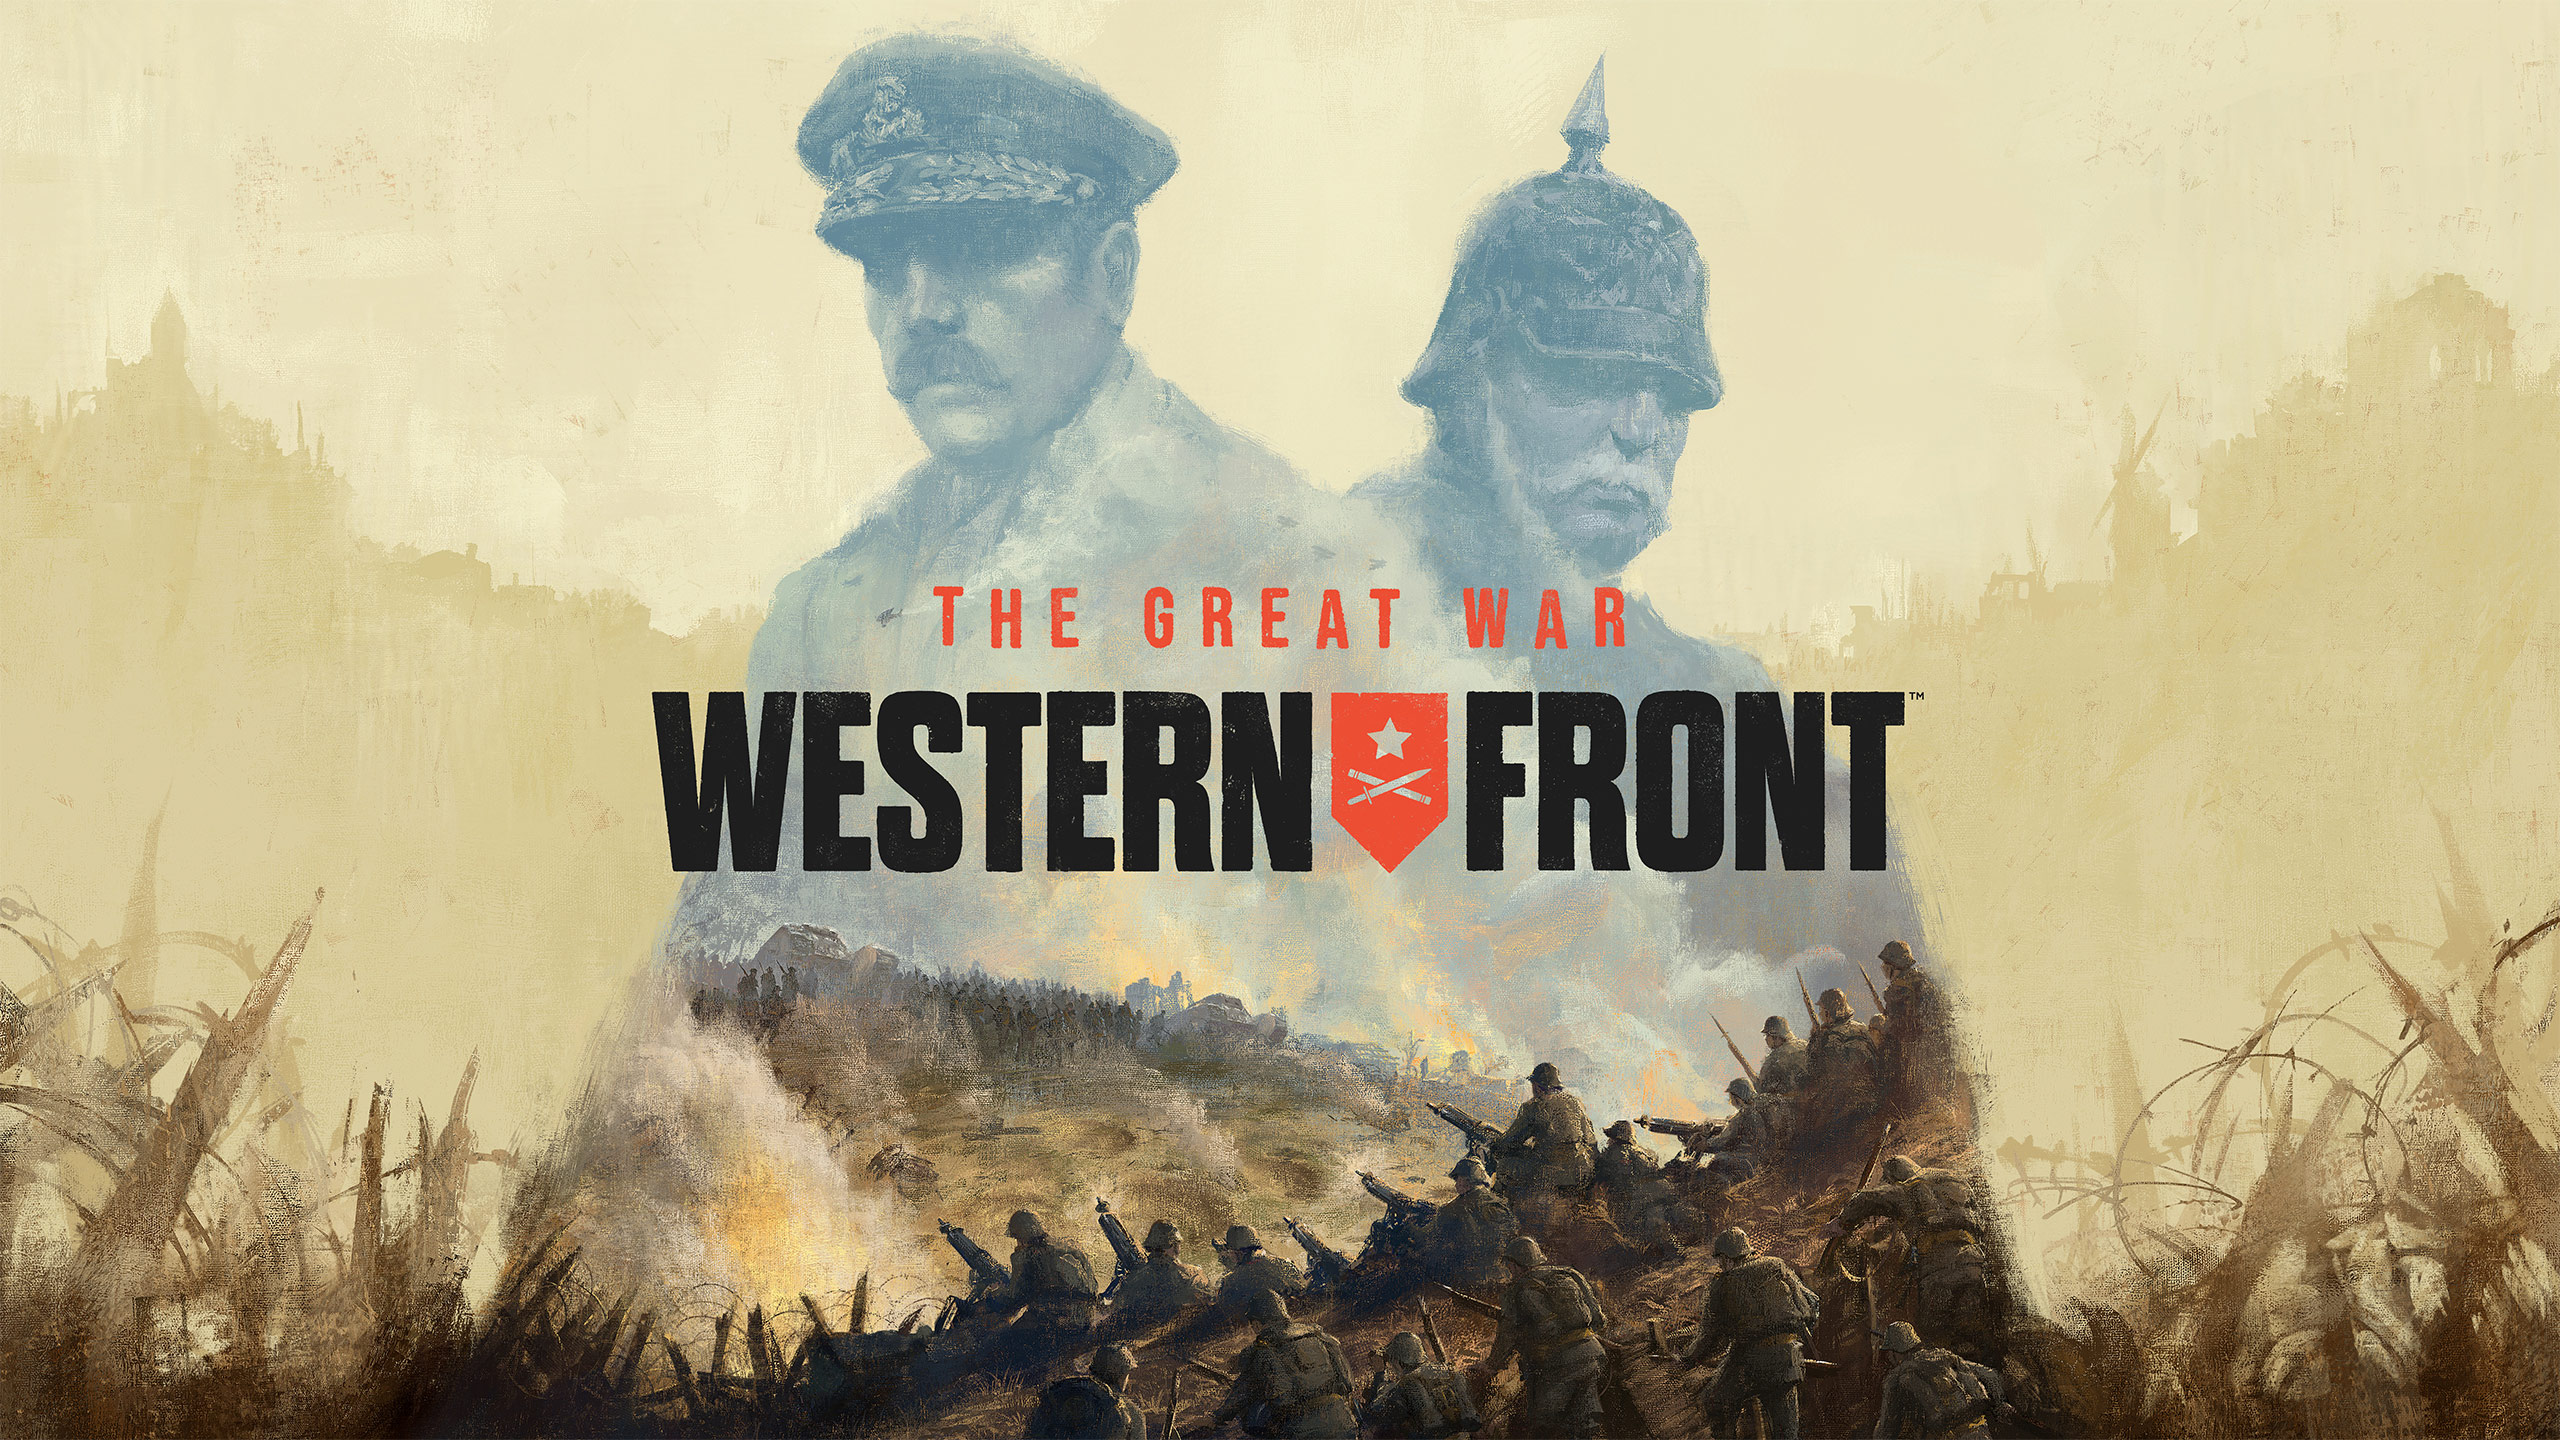 The Great War: Western Front shows us how its soundtrack was recorded